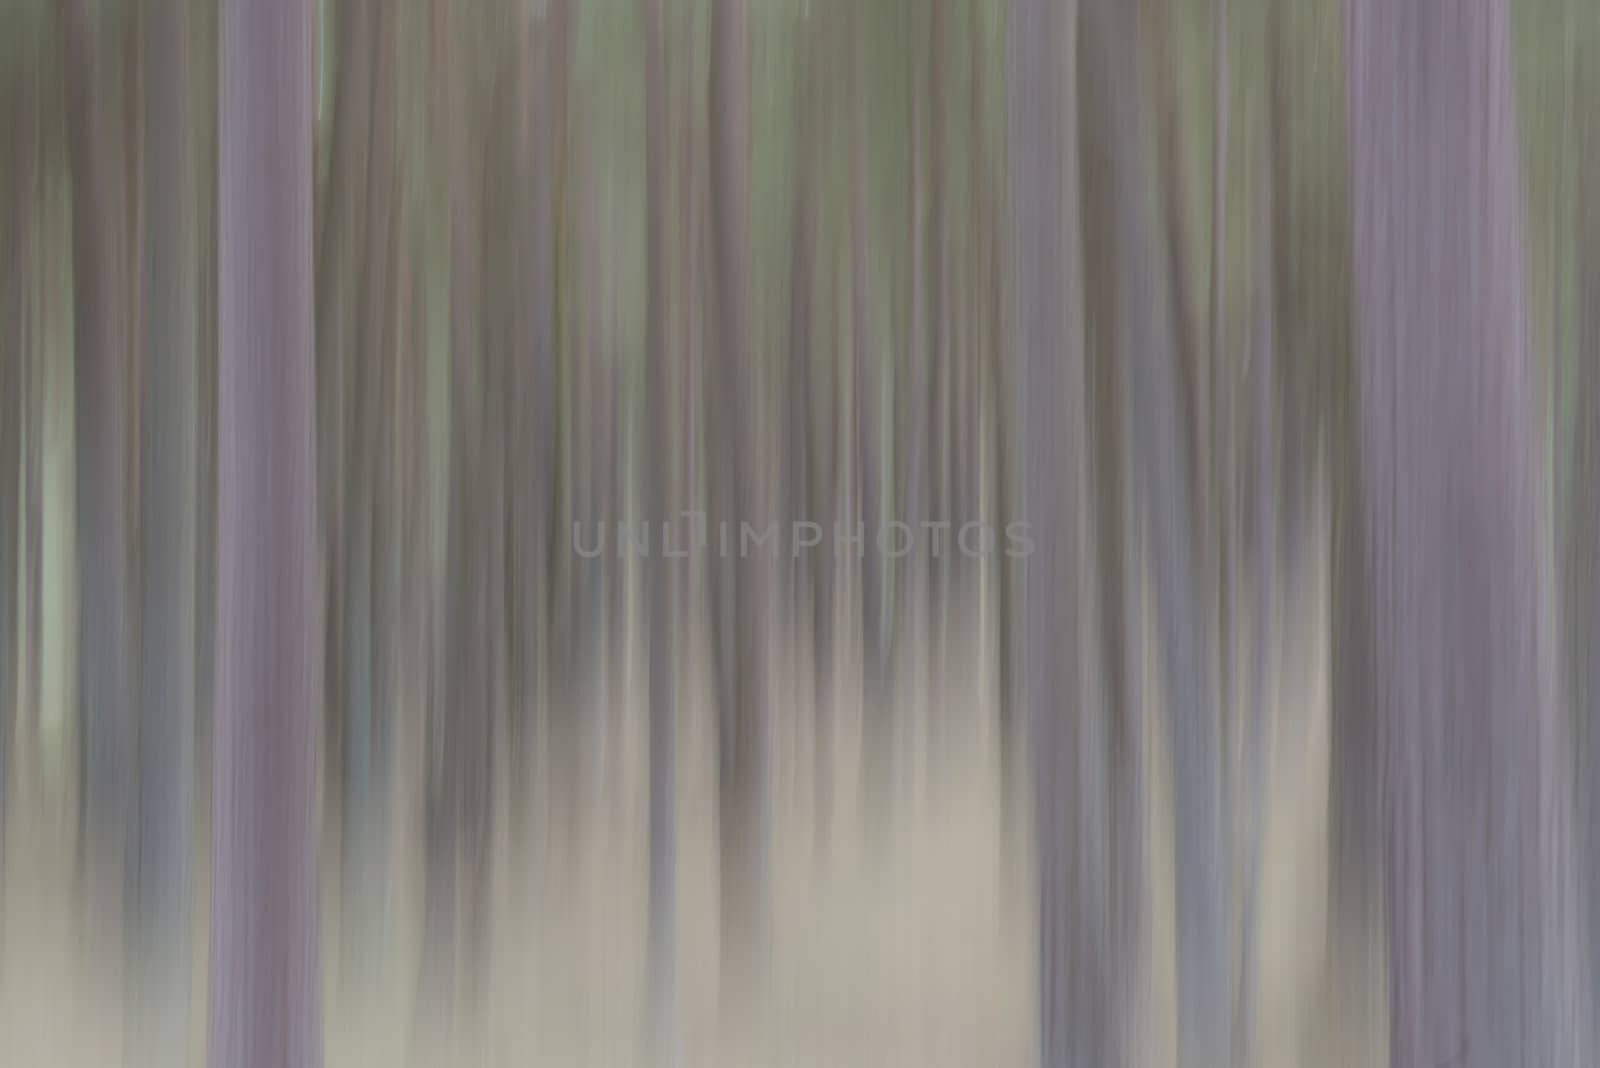 Abstract representation of trees by means of vertical movement as background picture
